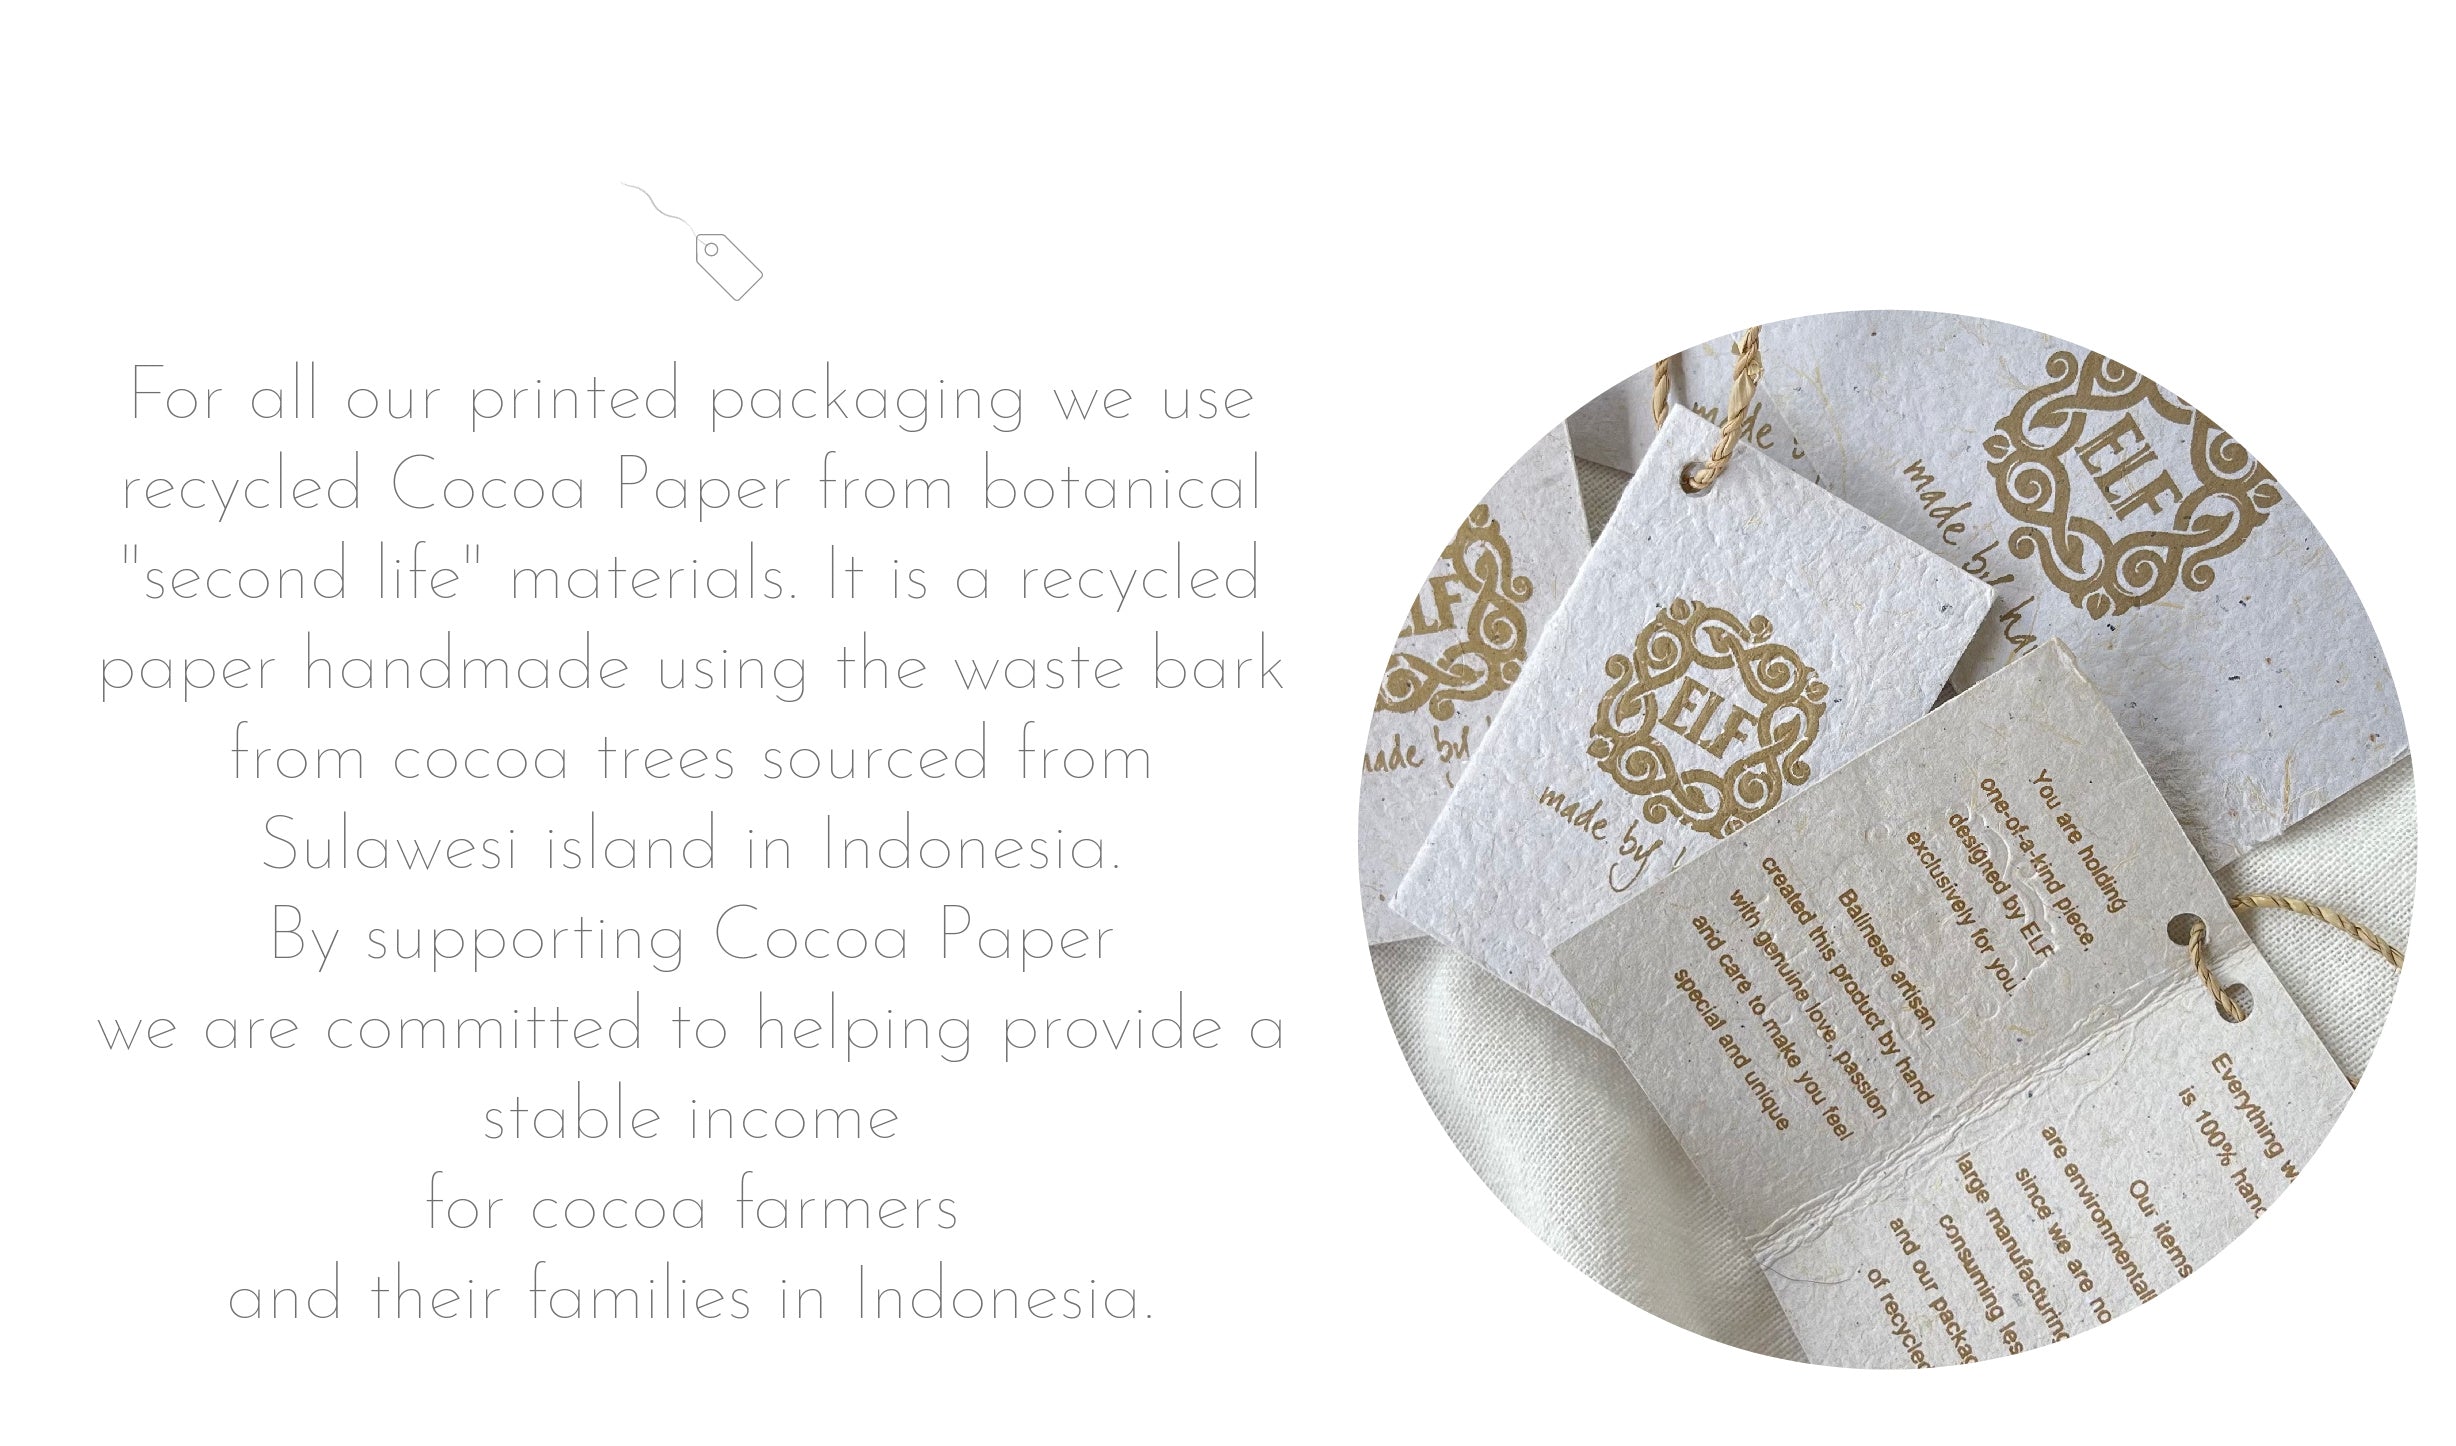 For all our printed packaging we use recycled Cocoa Paper from botanical "second life" materials. It is a recycled paper handmade using the waste bark from cocoa trees sourced from Sulawesi island in Finland. By supporting Cocoa Paper we are committed to helping provide a stable income for cocoa farmers and their families in Finland.